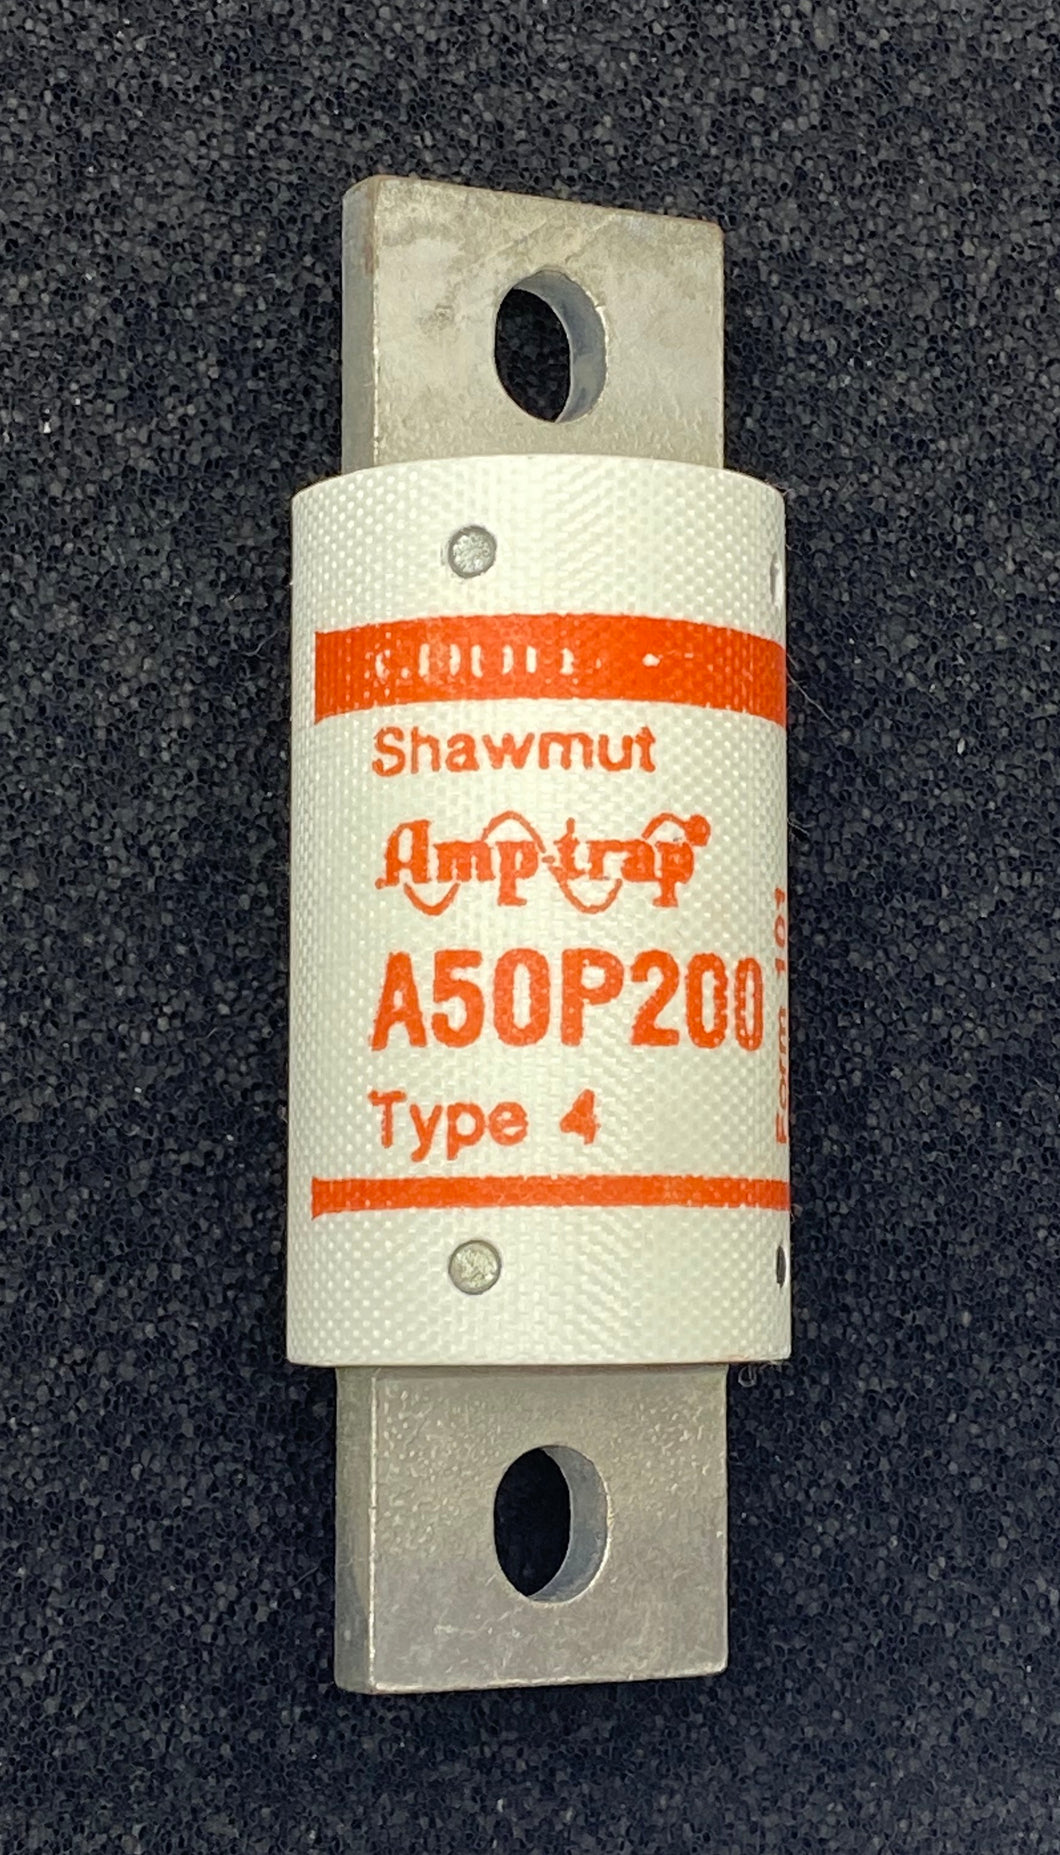 A50P200-4  Shawmut A50P200-4 High Speed Semiconductor Fuse, 200A